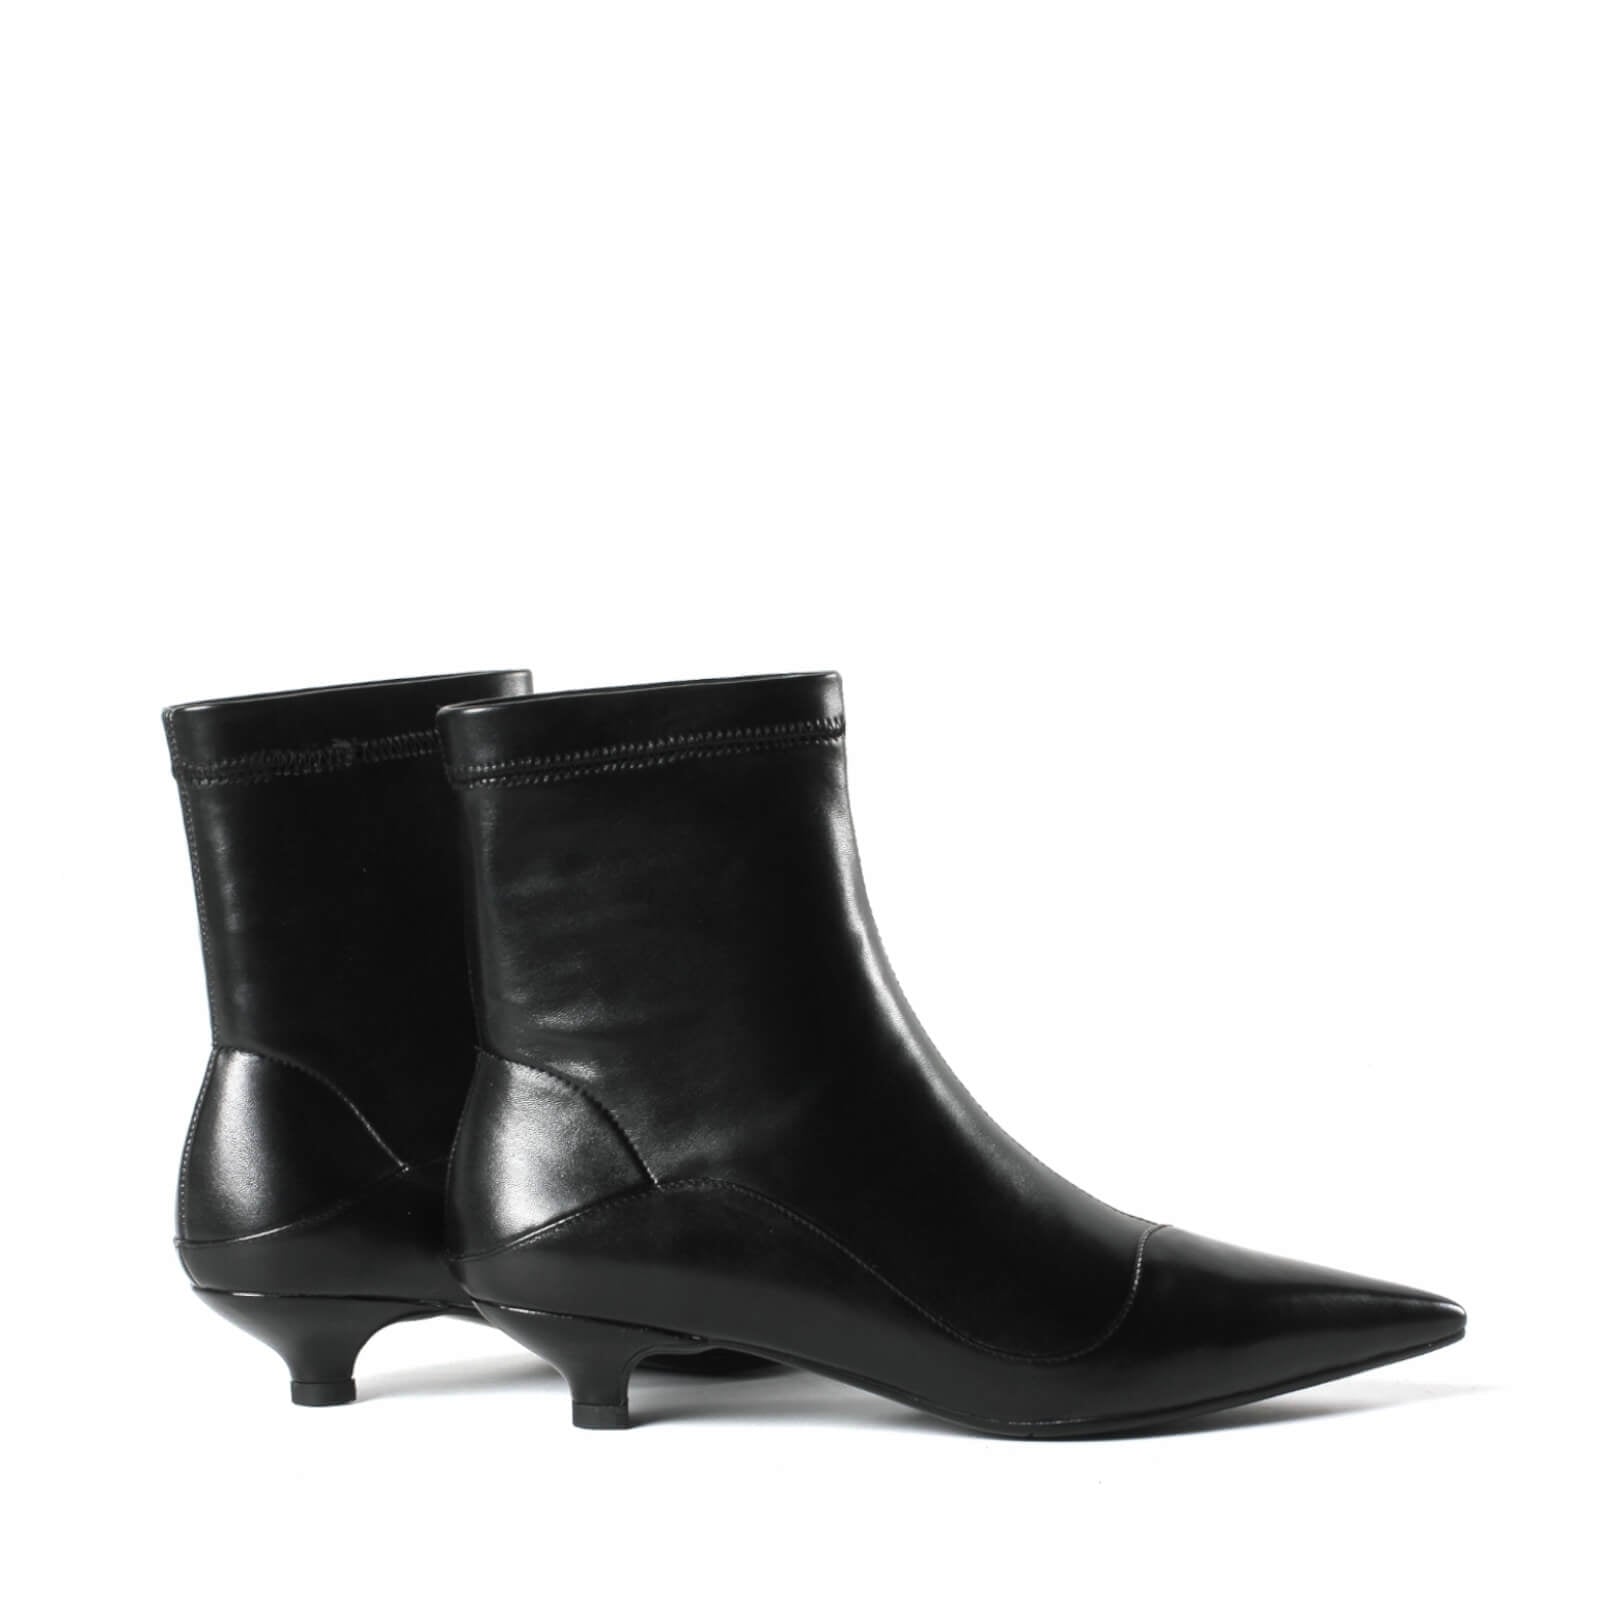 Kaly-Kitten-Heels-Pointed-Toe-Stitching-Vamp-Black-Ankle-Boots-Leather-4